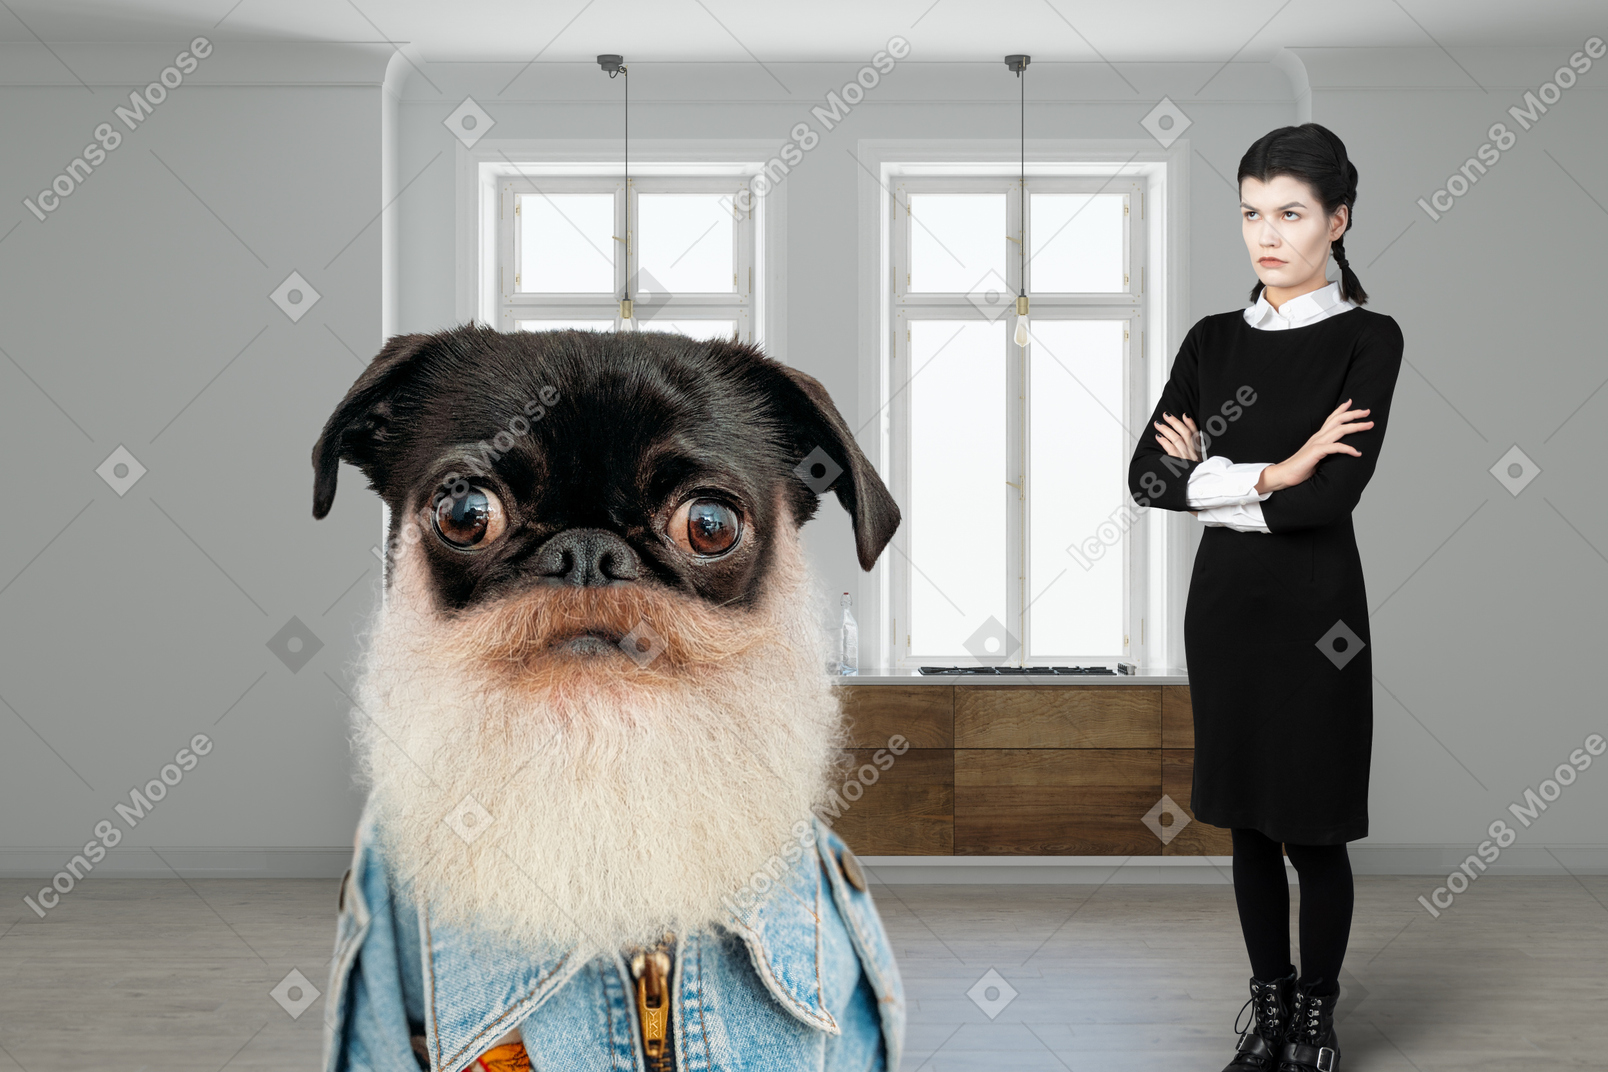 A man and a woman standing next to a dog